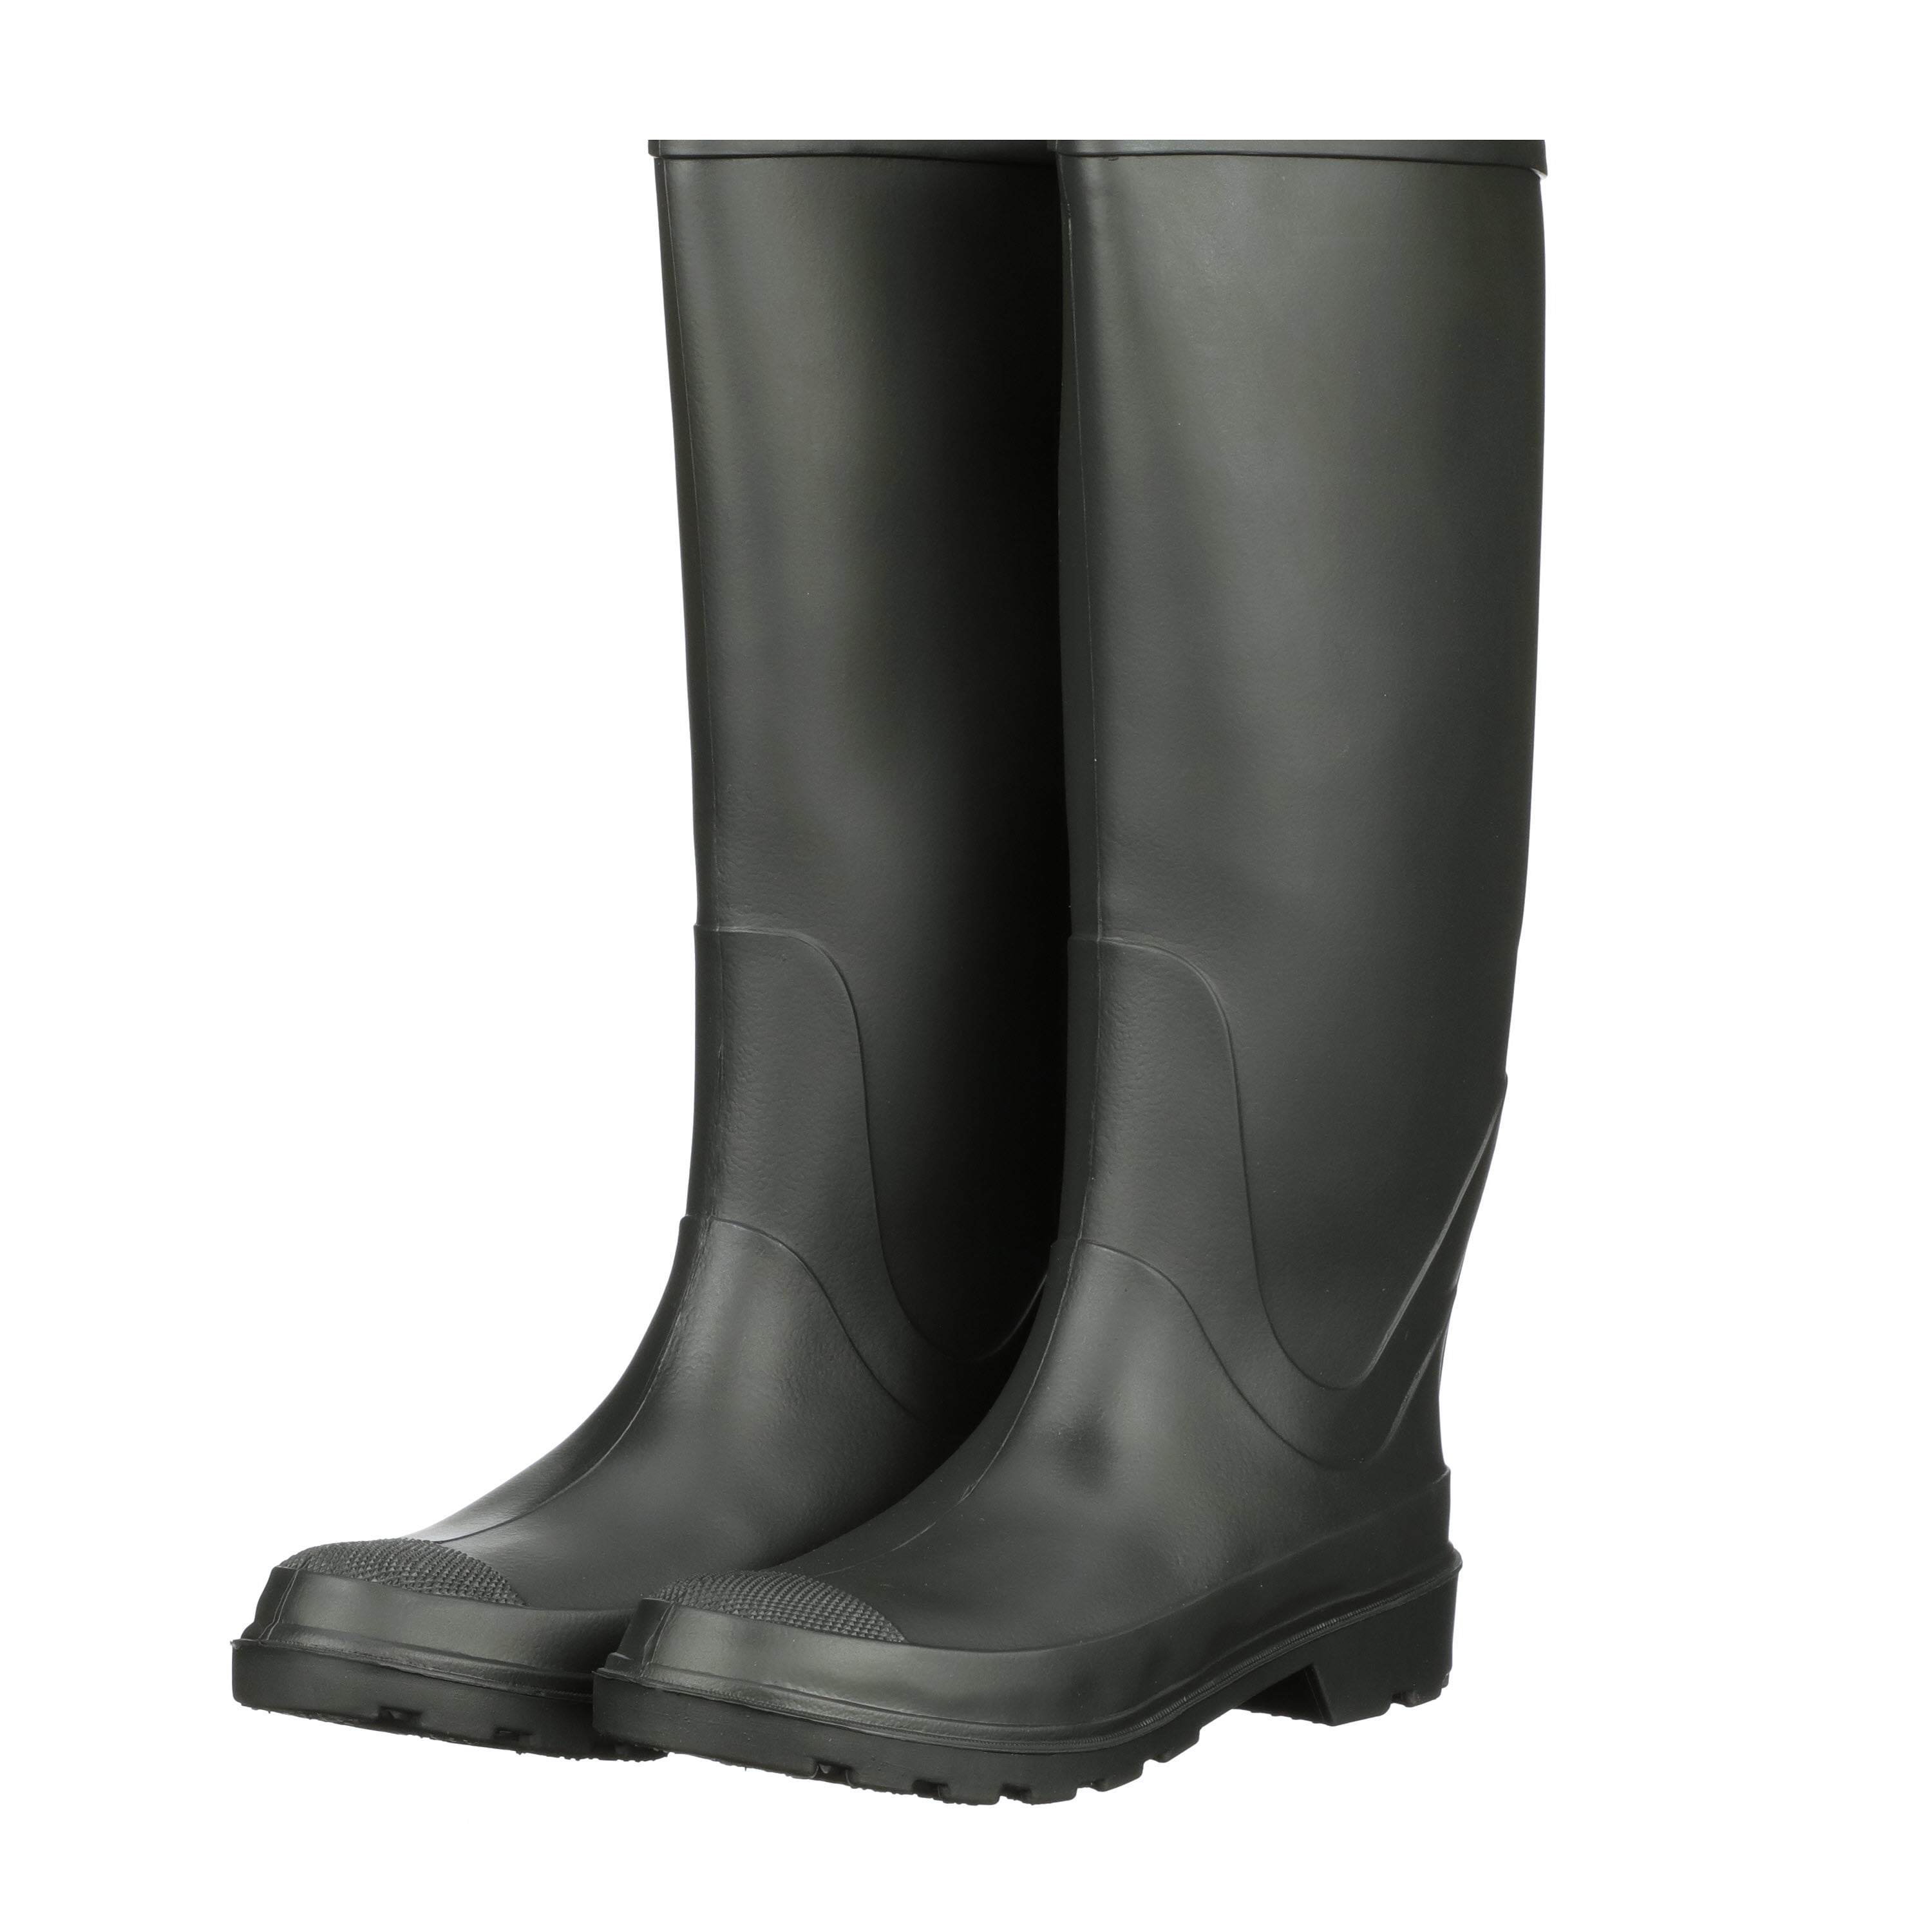 Town & Country Essentials Half Length Wellington Boots 4 5 6 7 8 9 10 waterproof